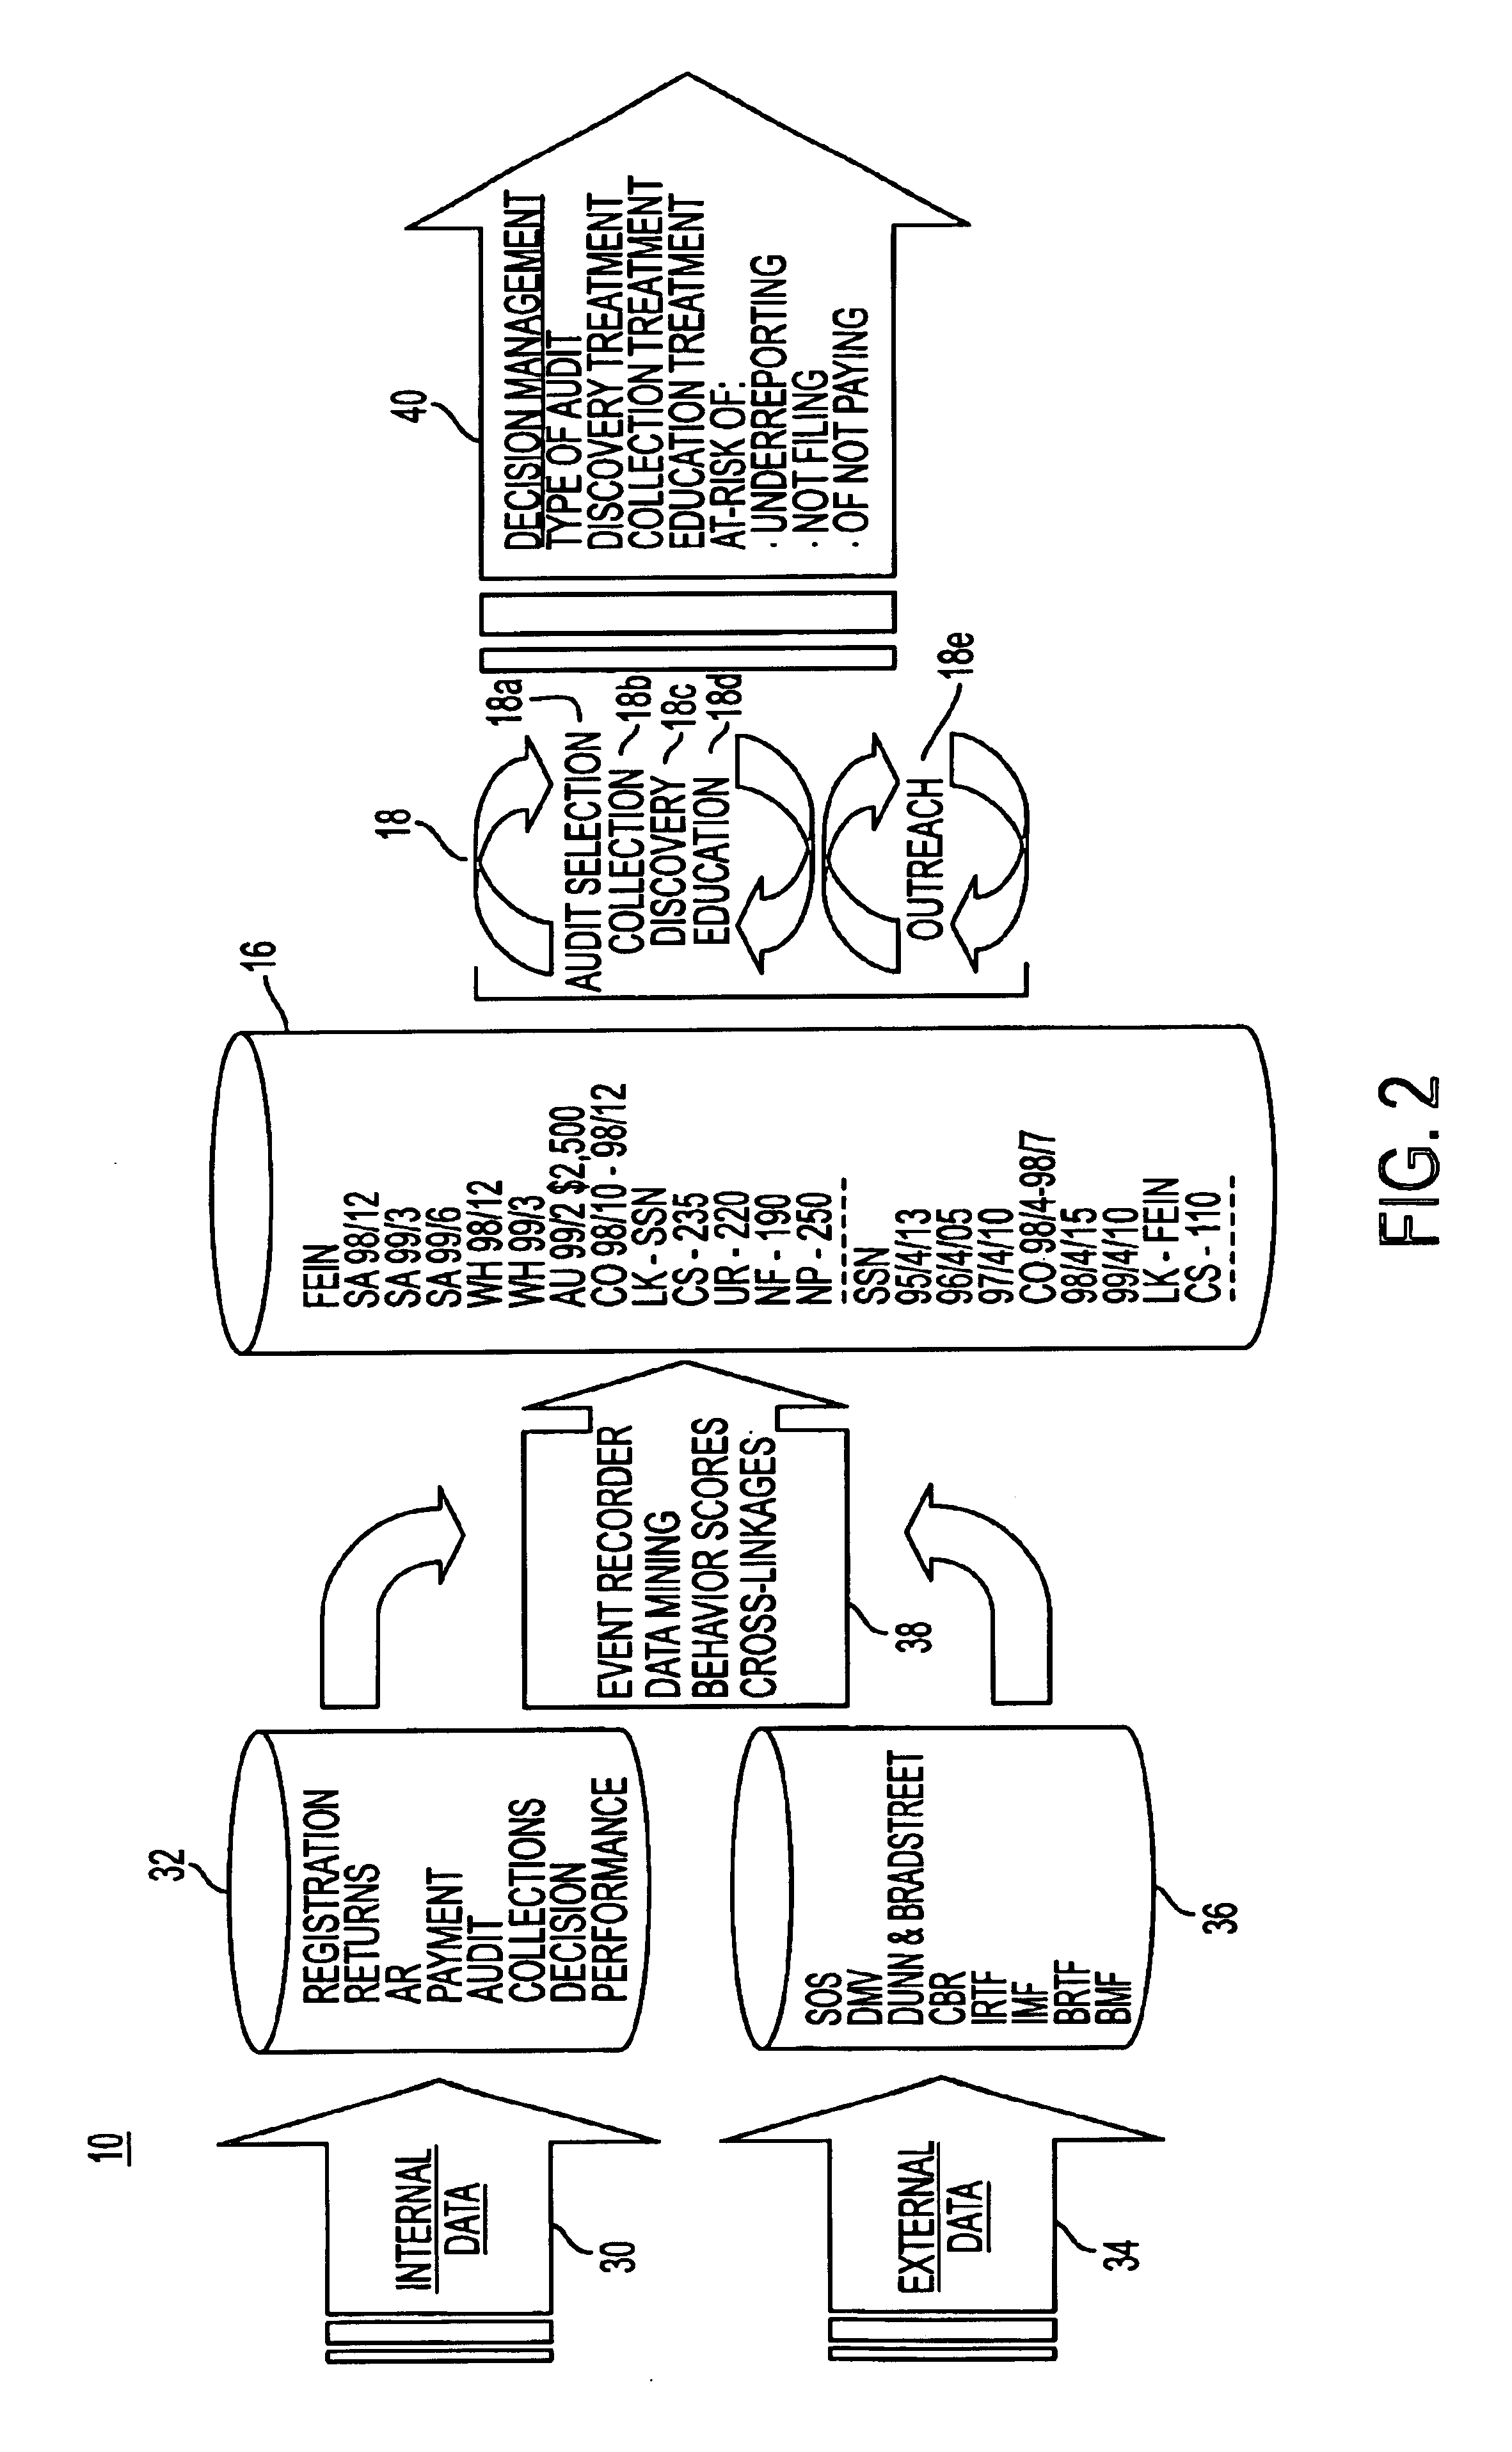 Method and apparatus for promoting taxpayer compliance